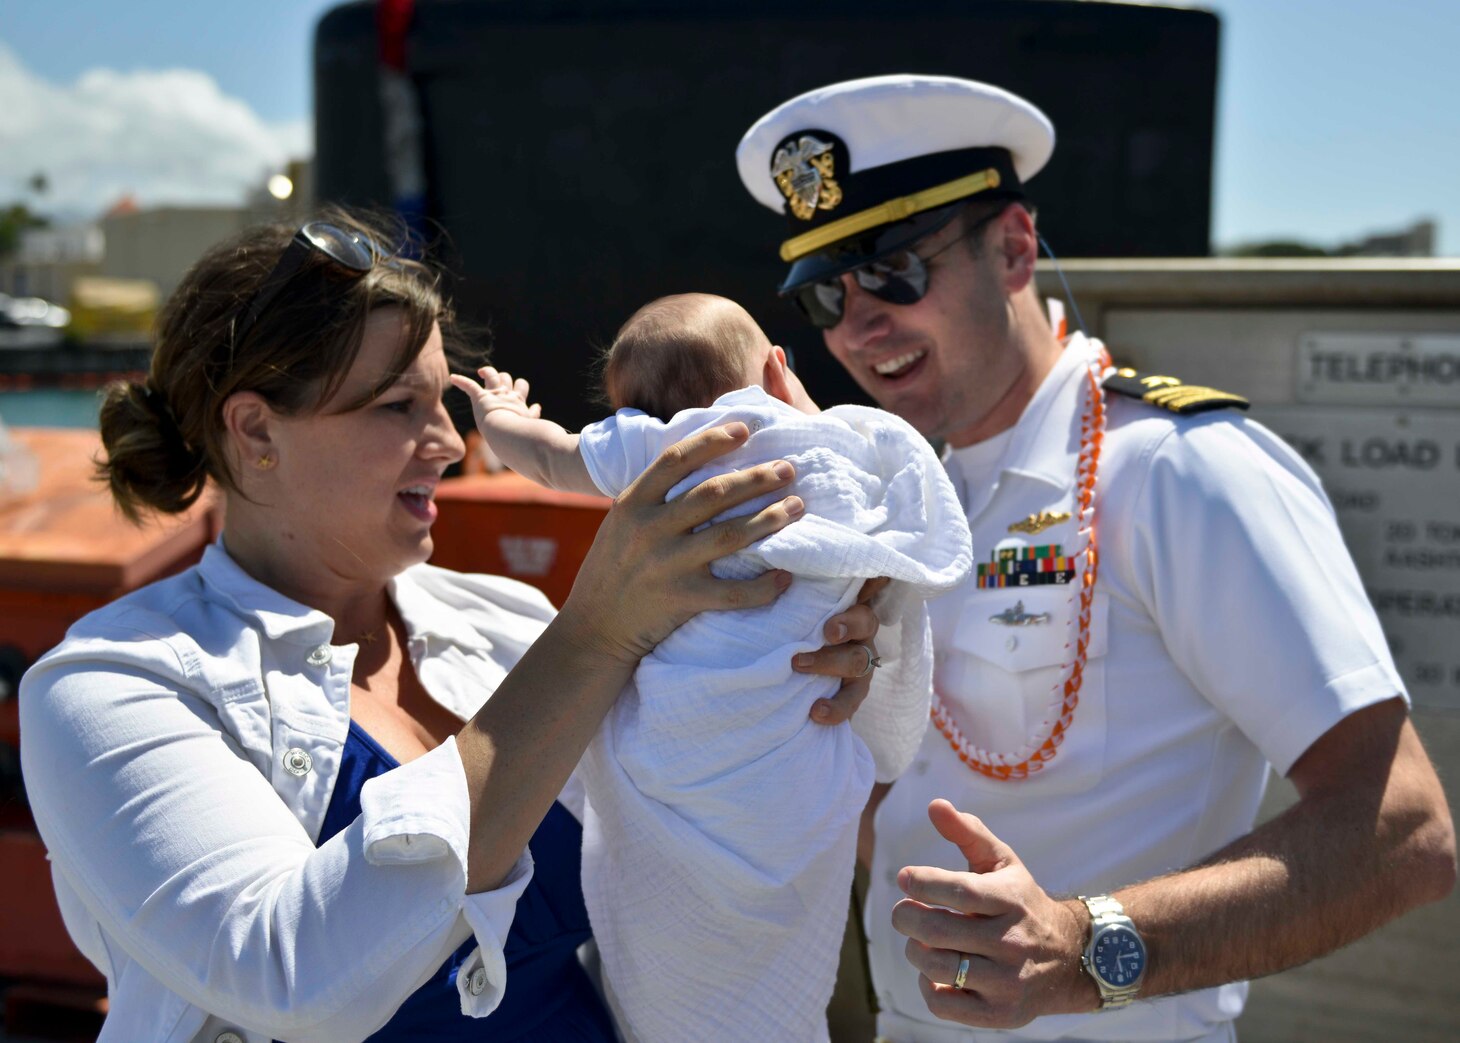 PEARL HARBOR (March 9, 2016) Lieutenant Commander Sean Gray of Nampa, Idaho, the executive officer of the Virginia-Class fast-attack submarine USS Texas (SSN 775), meets for the first time, his 7-week-old daughter, Vivian, presented to him by his wife, Jennifer, following the return of the submarine to Pearl Harbor, after completing a scheduled Western Pacific deployment. (U.S. Navy photo by Mass Communication Specialist 2nd Class Michael H. Lee/Released)